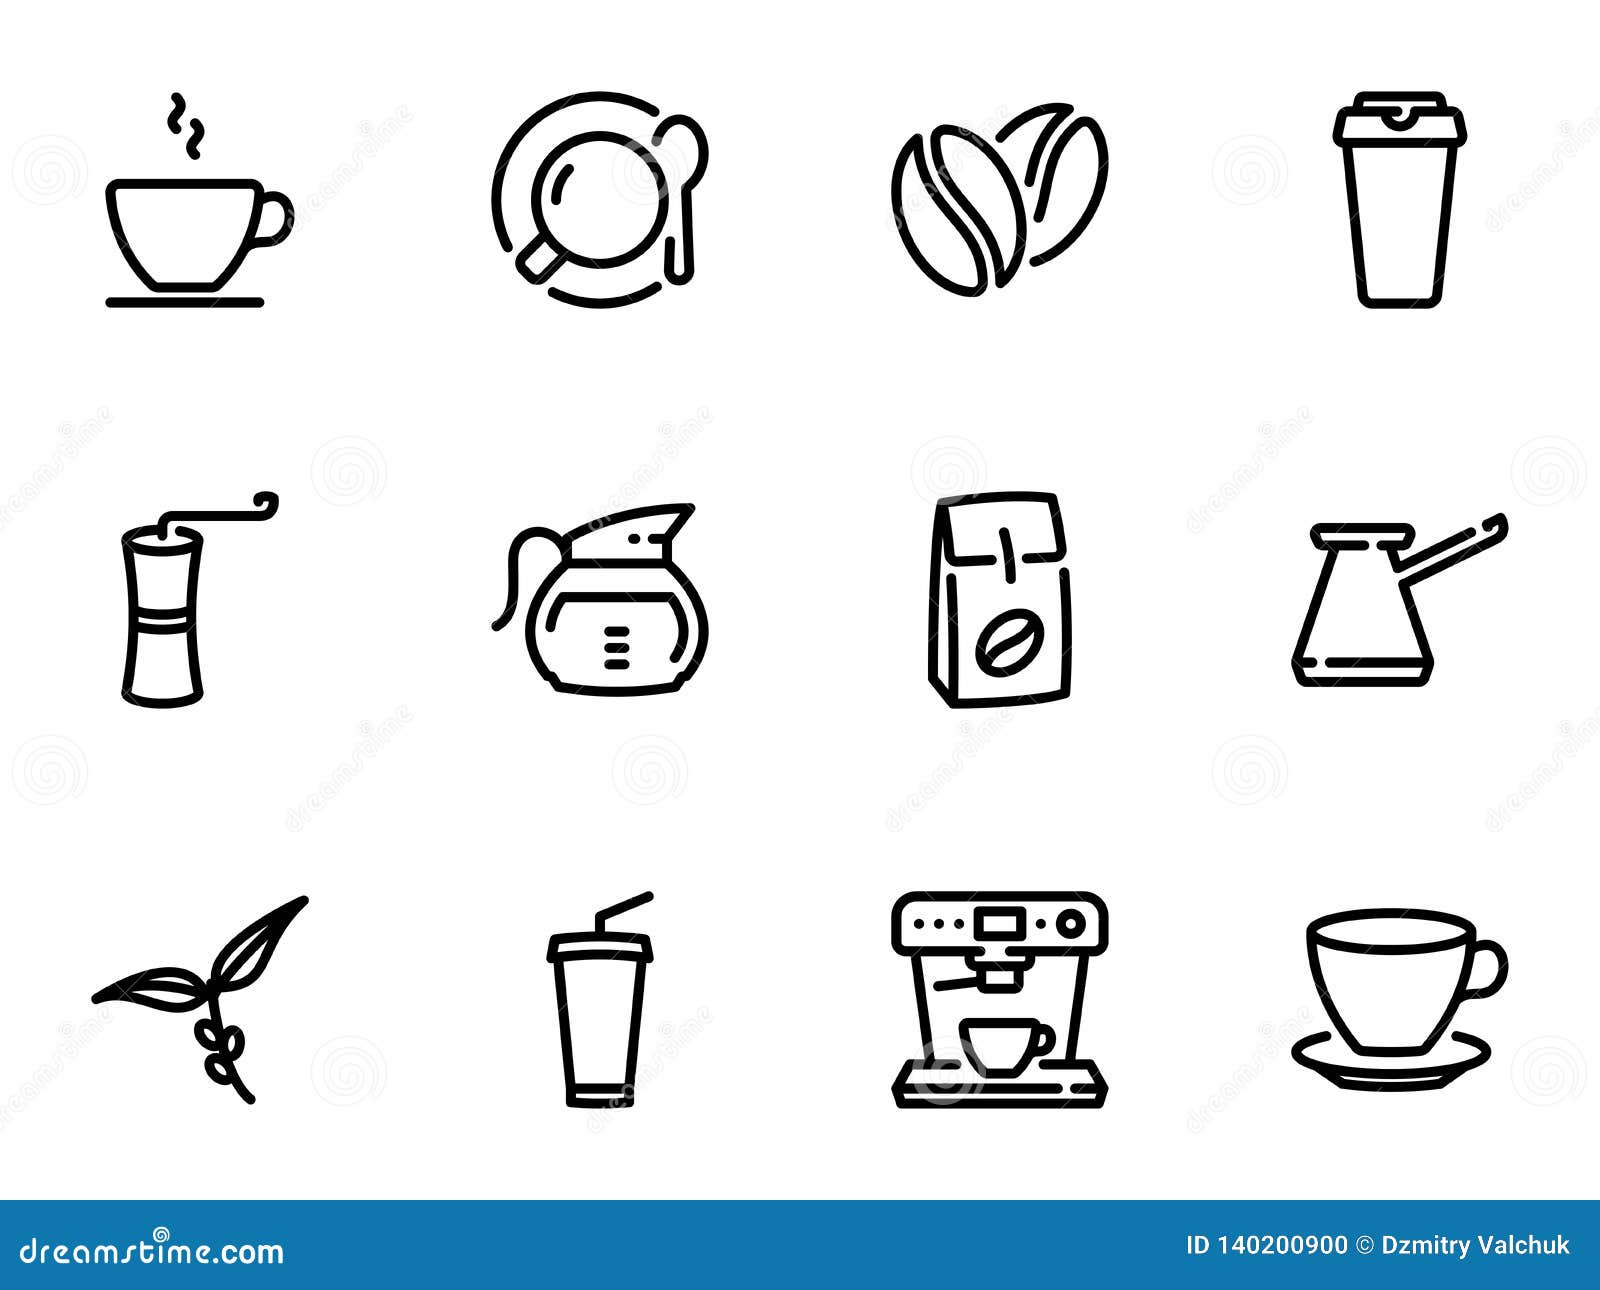 https://thumbs.dreamstime.com/z/set-black-vector-icons-isolated-against-white-background-illustration-theme-coffee-140200900.jpg